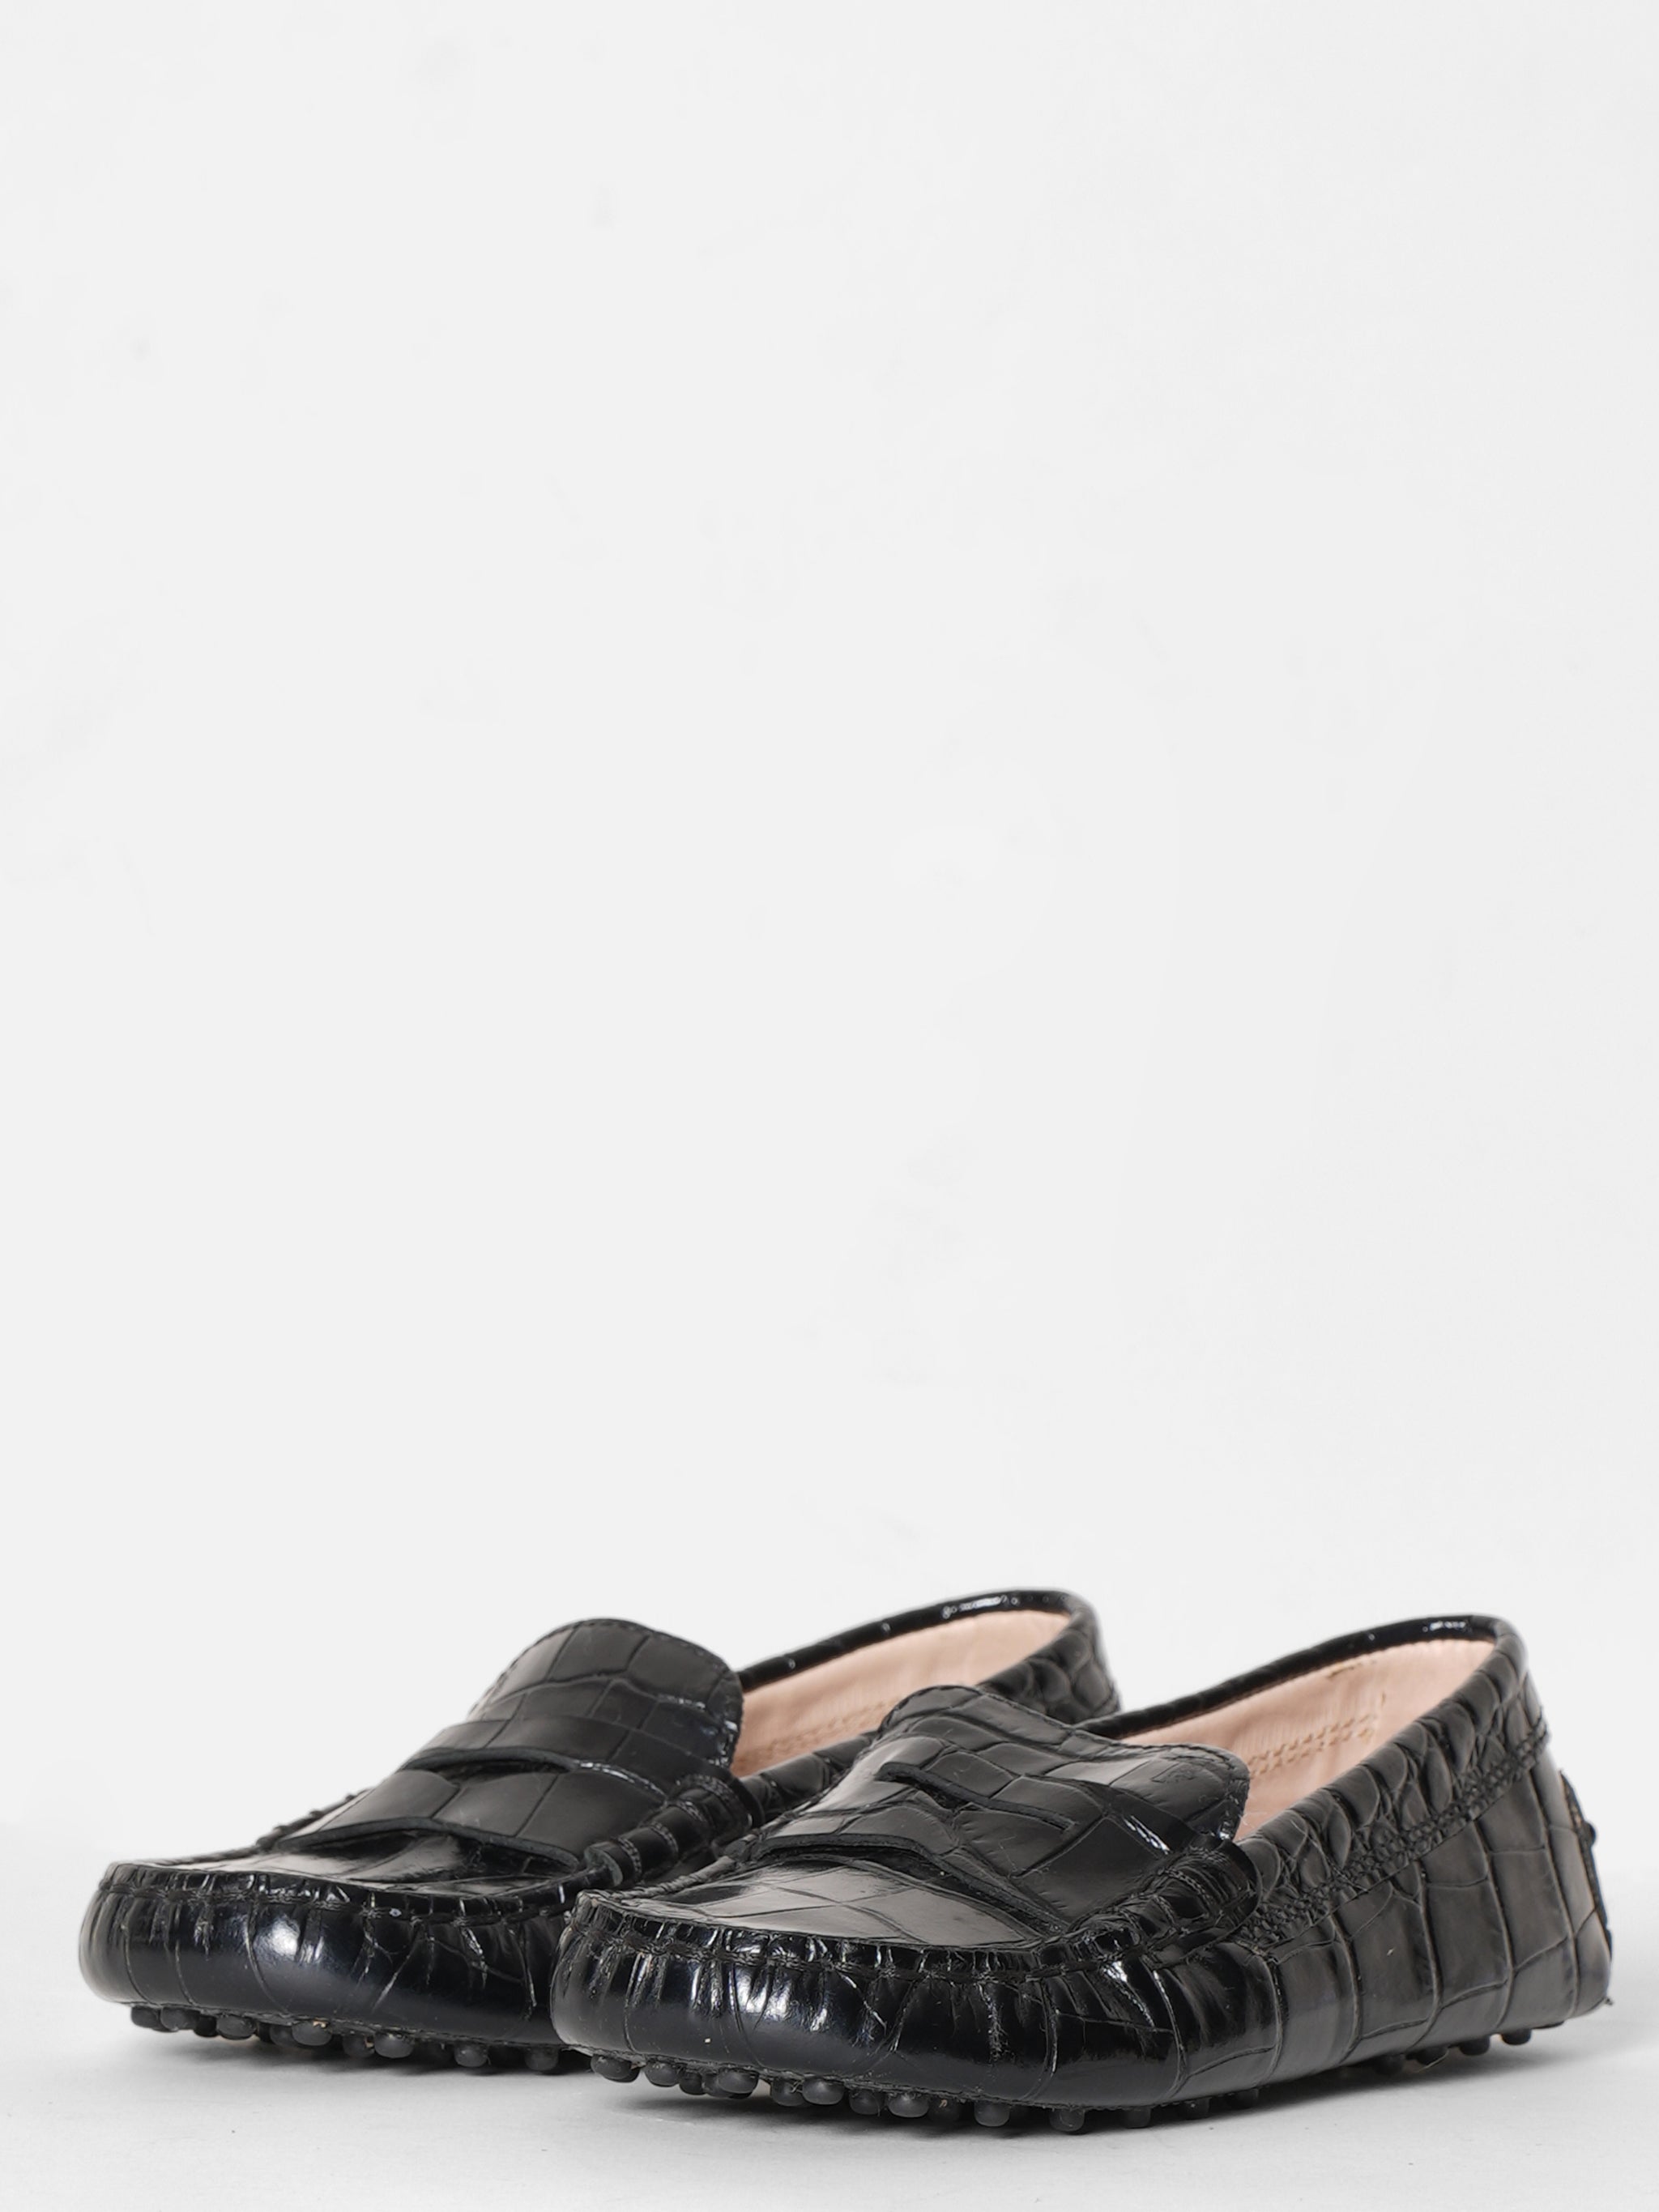 Junior TOD'S Black Loafers